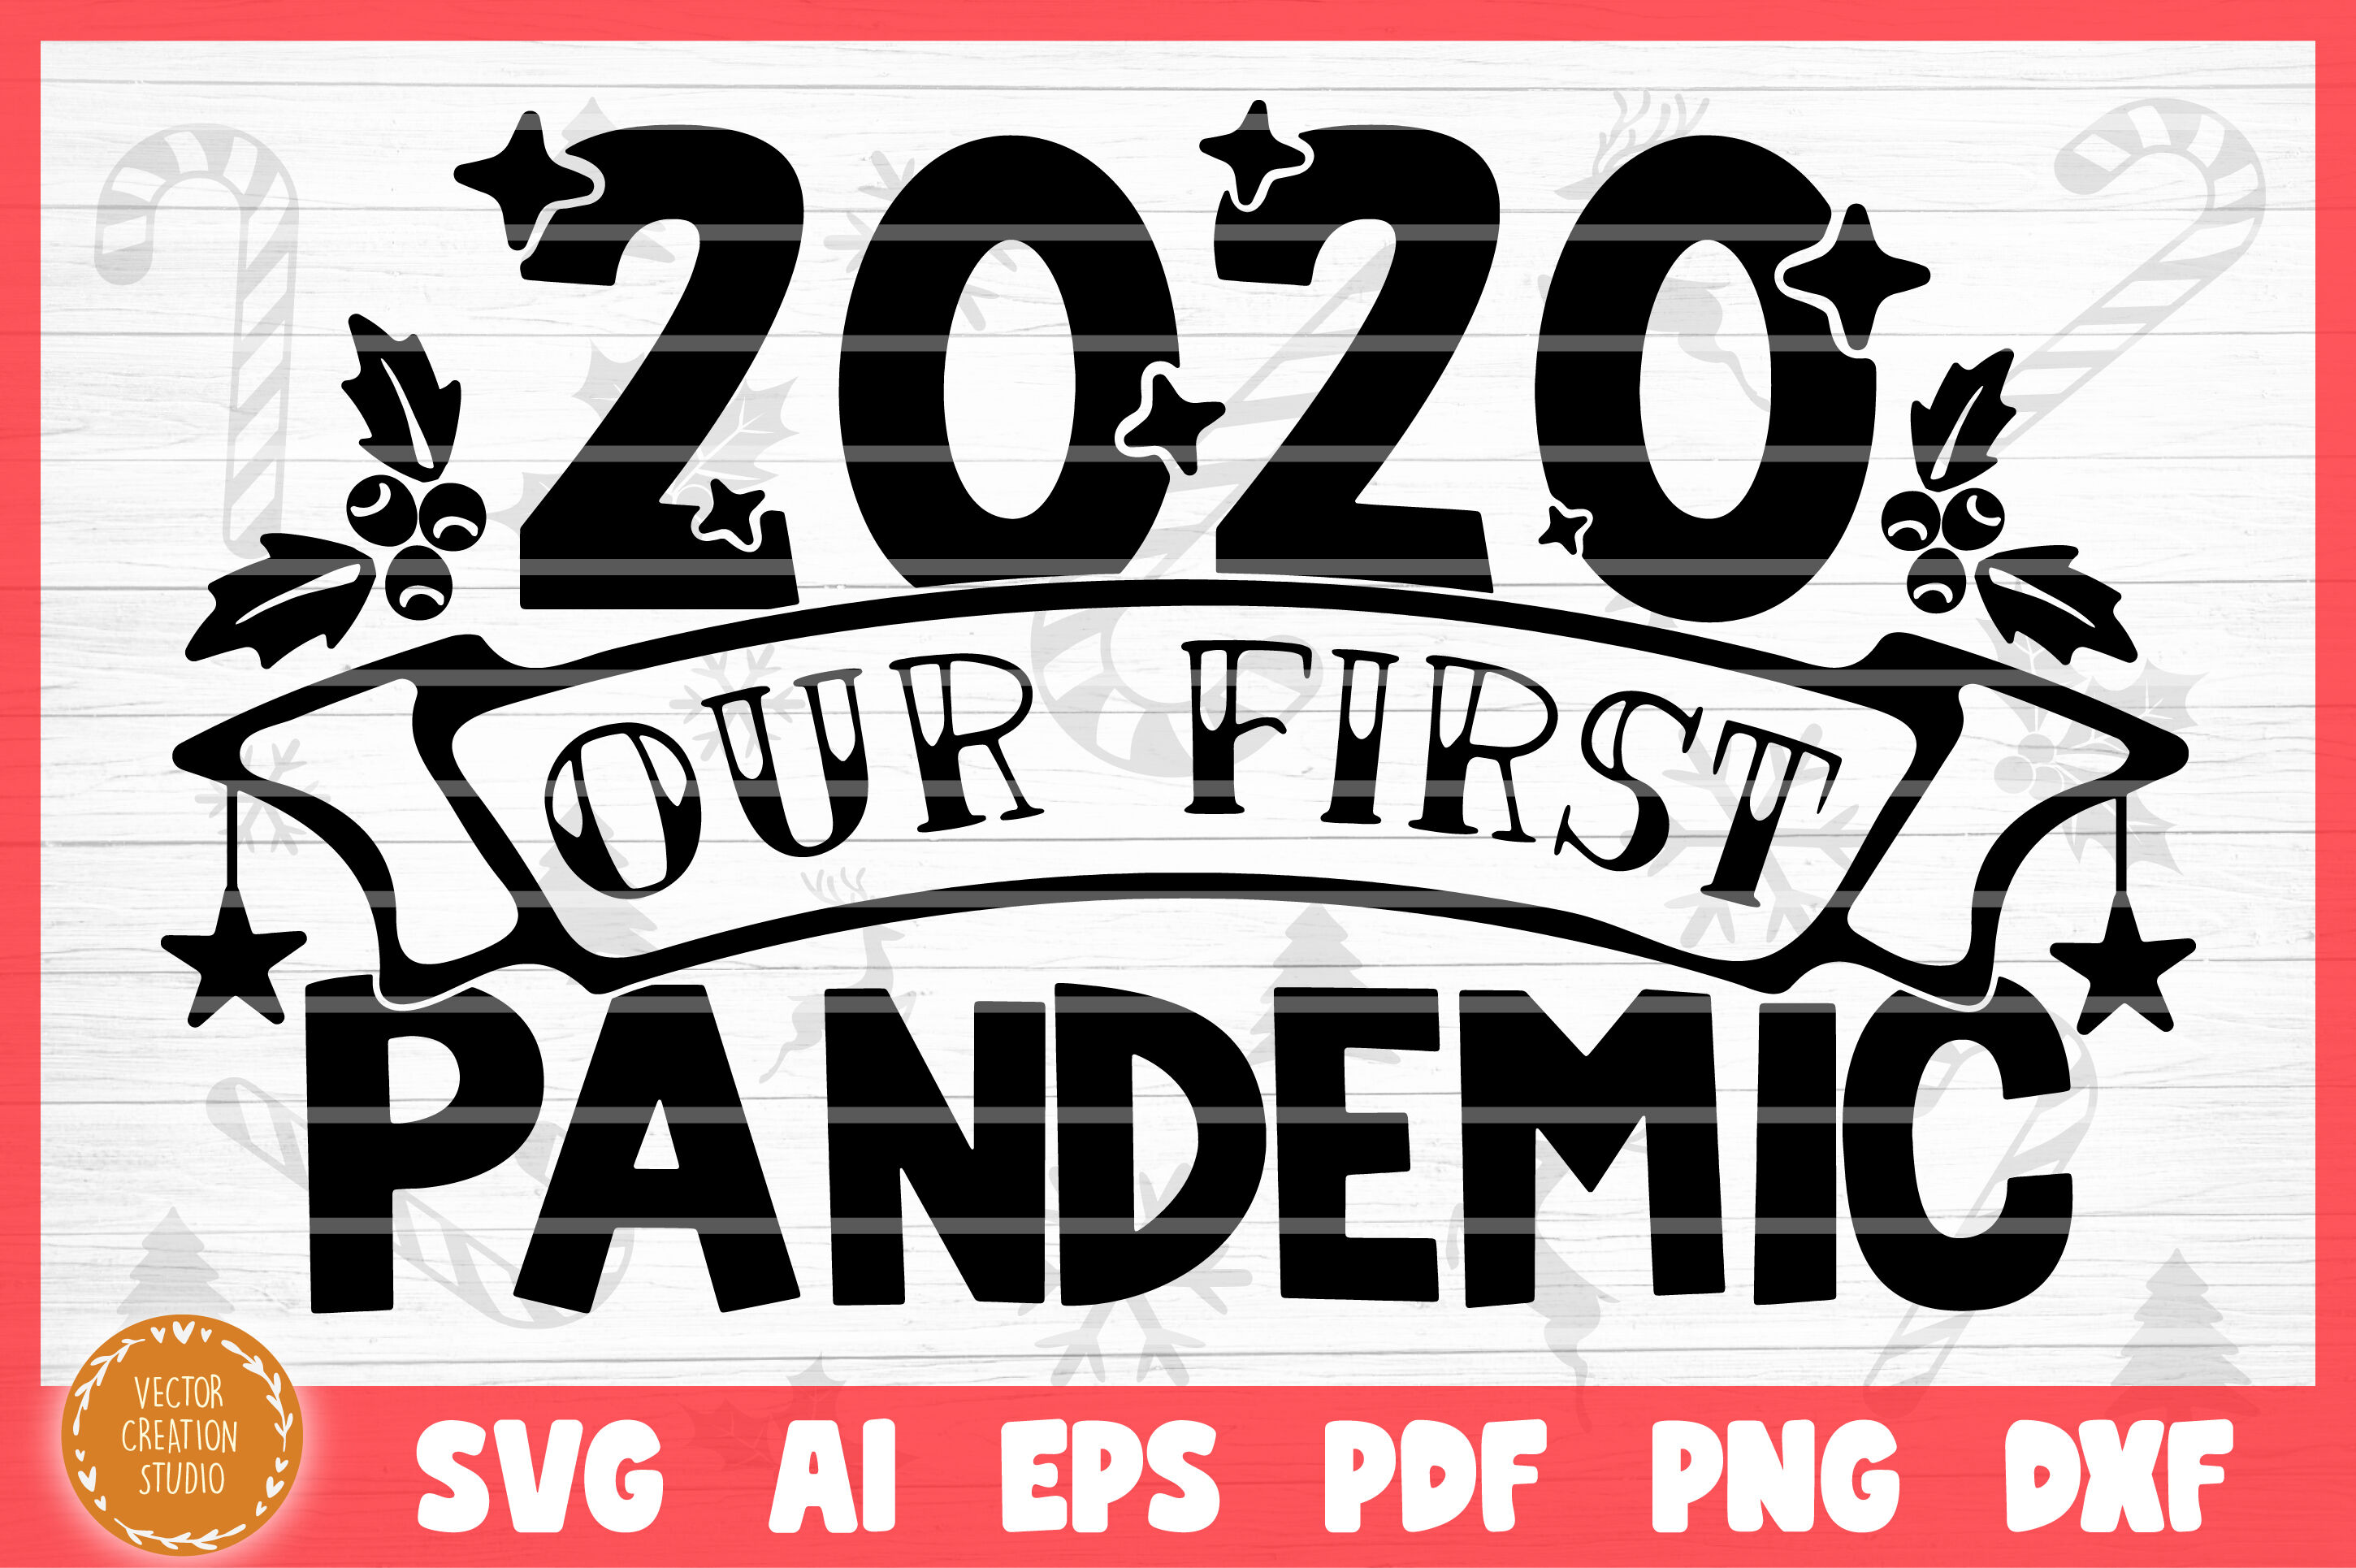 Download 2020 Our First Pandemic Christmas 2020 Svg Cut File By Vectorcreationstudio Thehungryjpeg Com